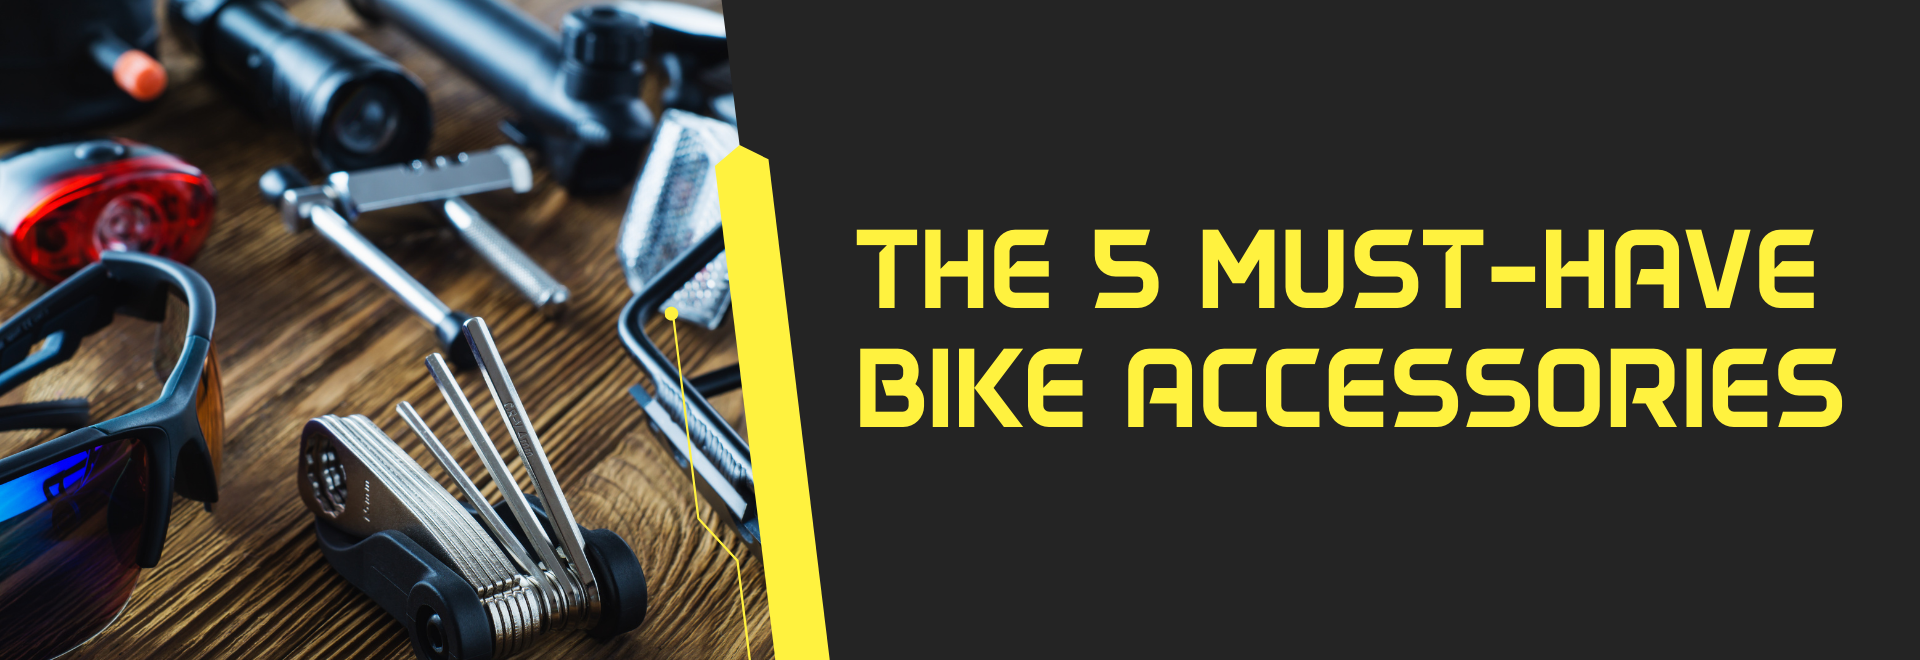 The 5 must-have accessories on the bike